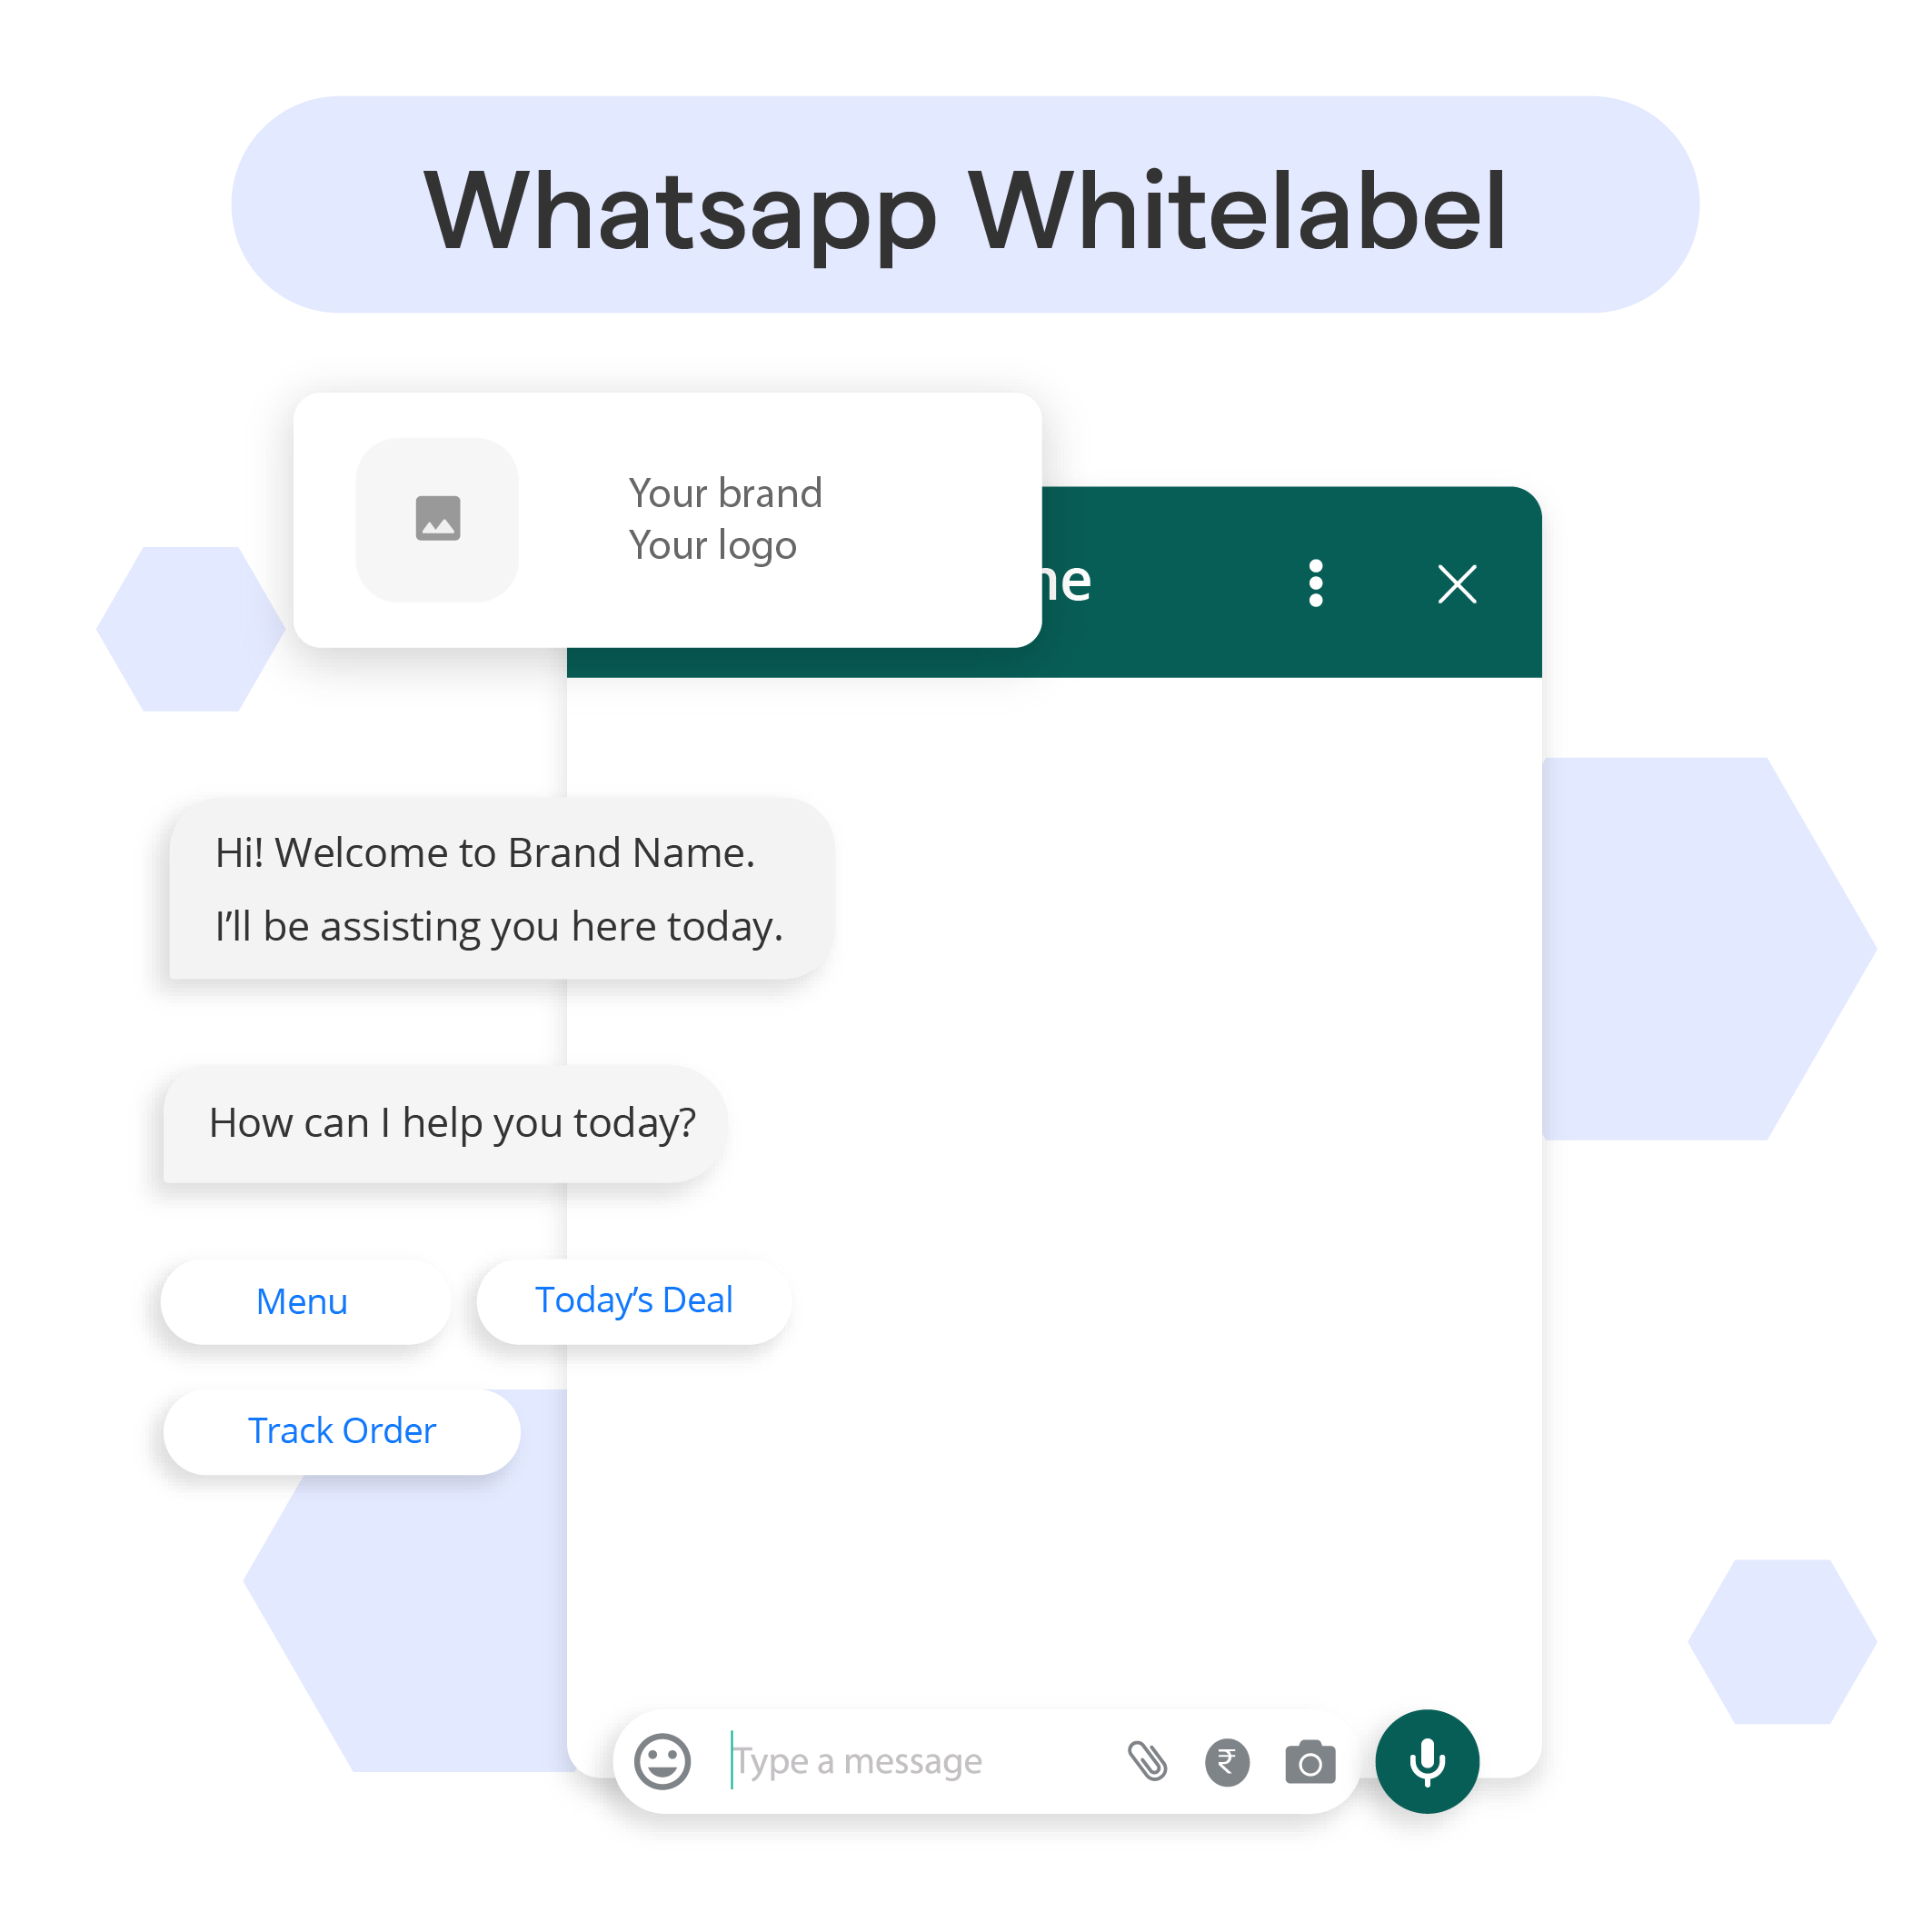 What is a WhatsApp Whitelabel Chatbot?